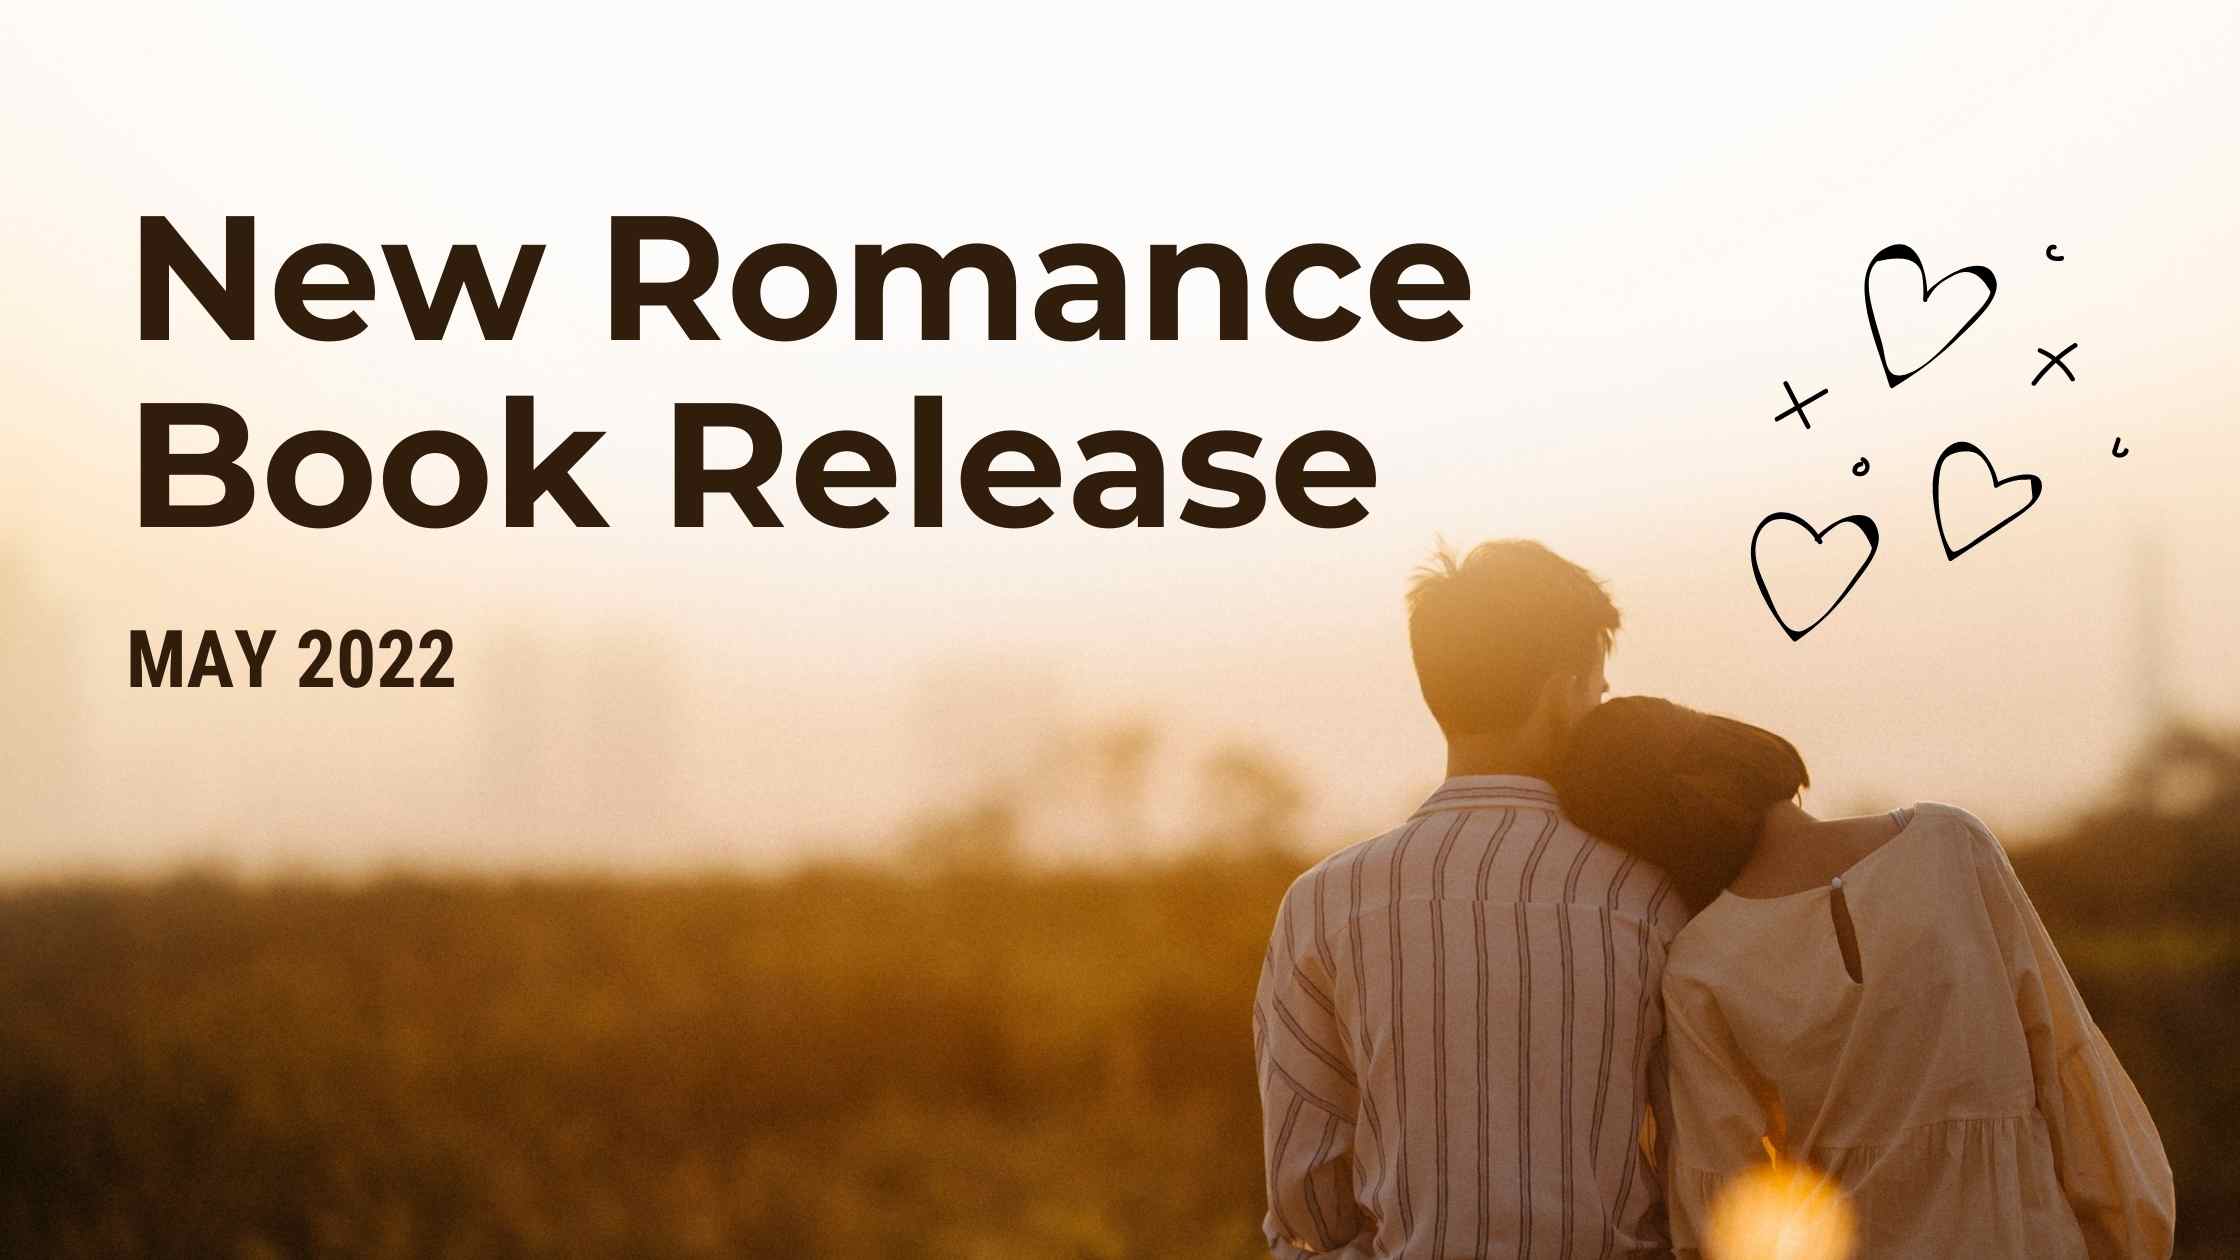 New Romance Book Release May 2022